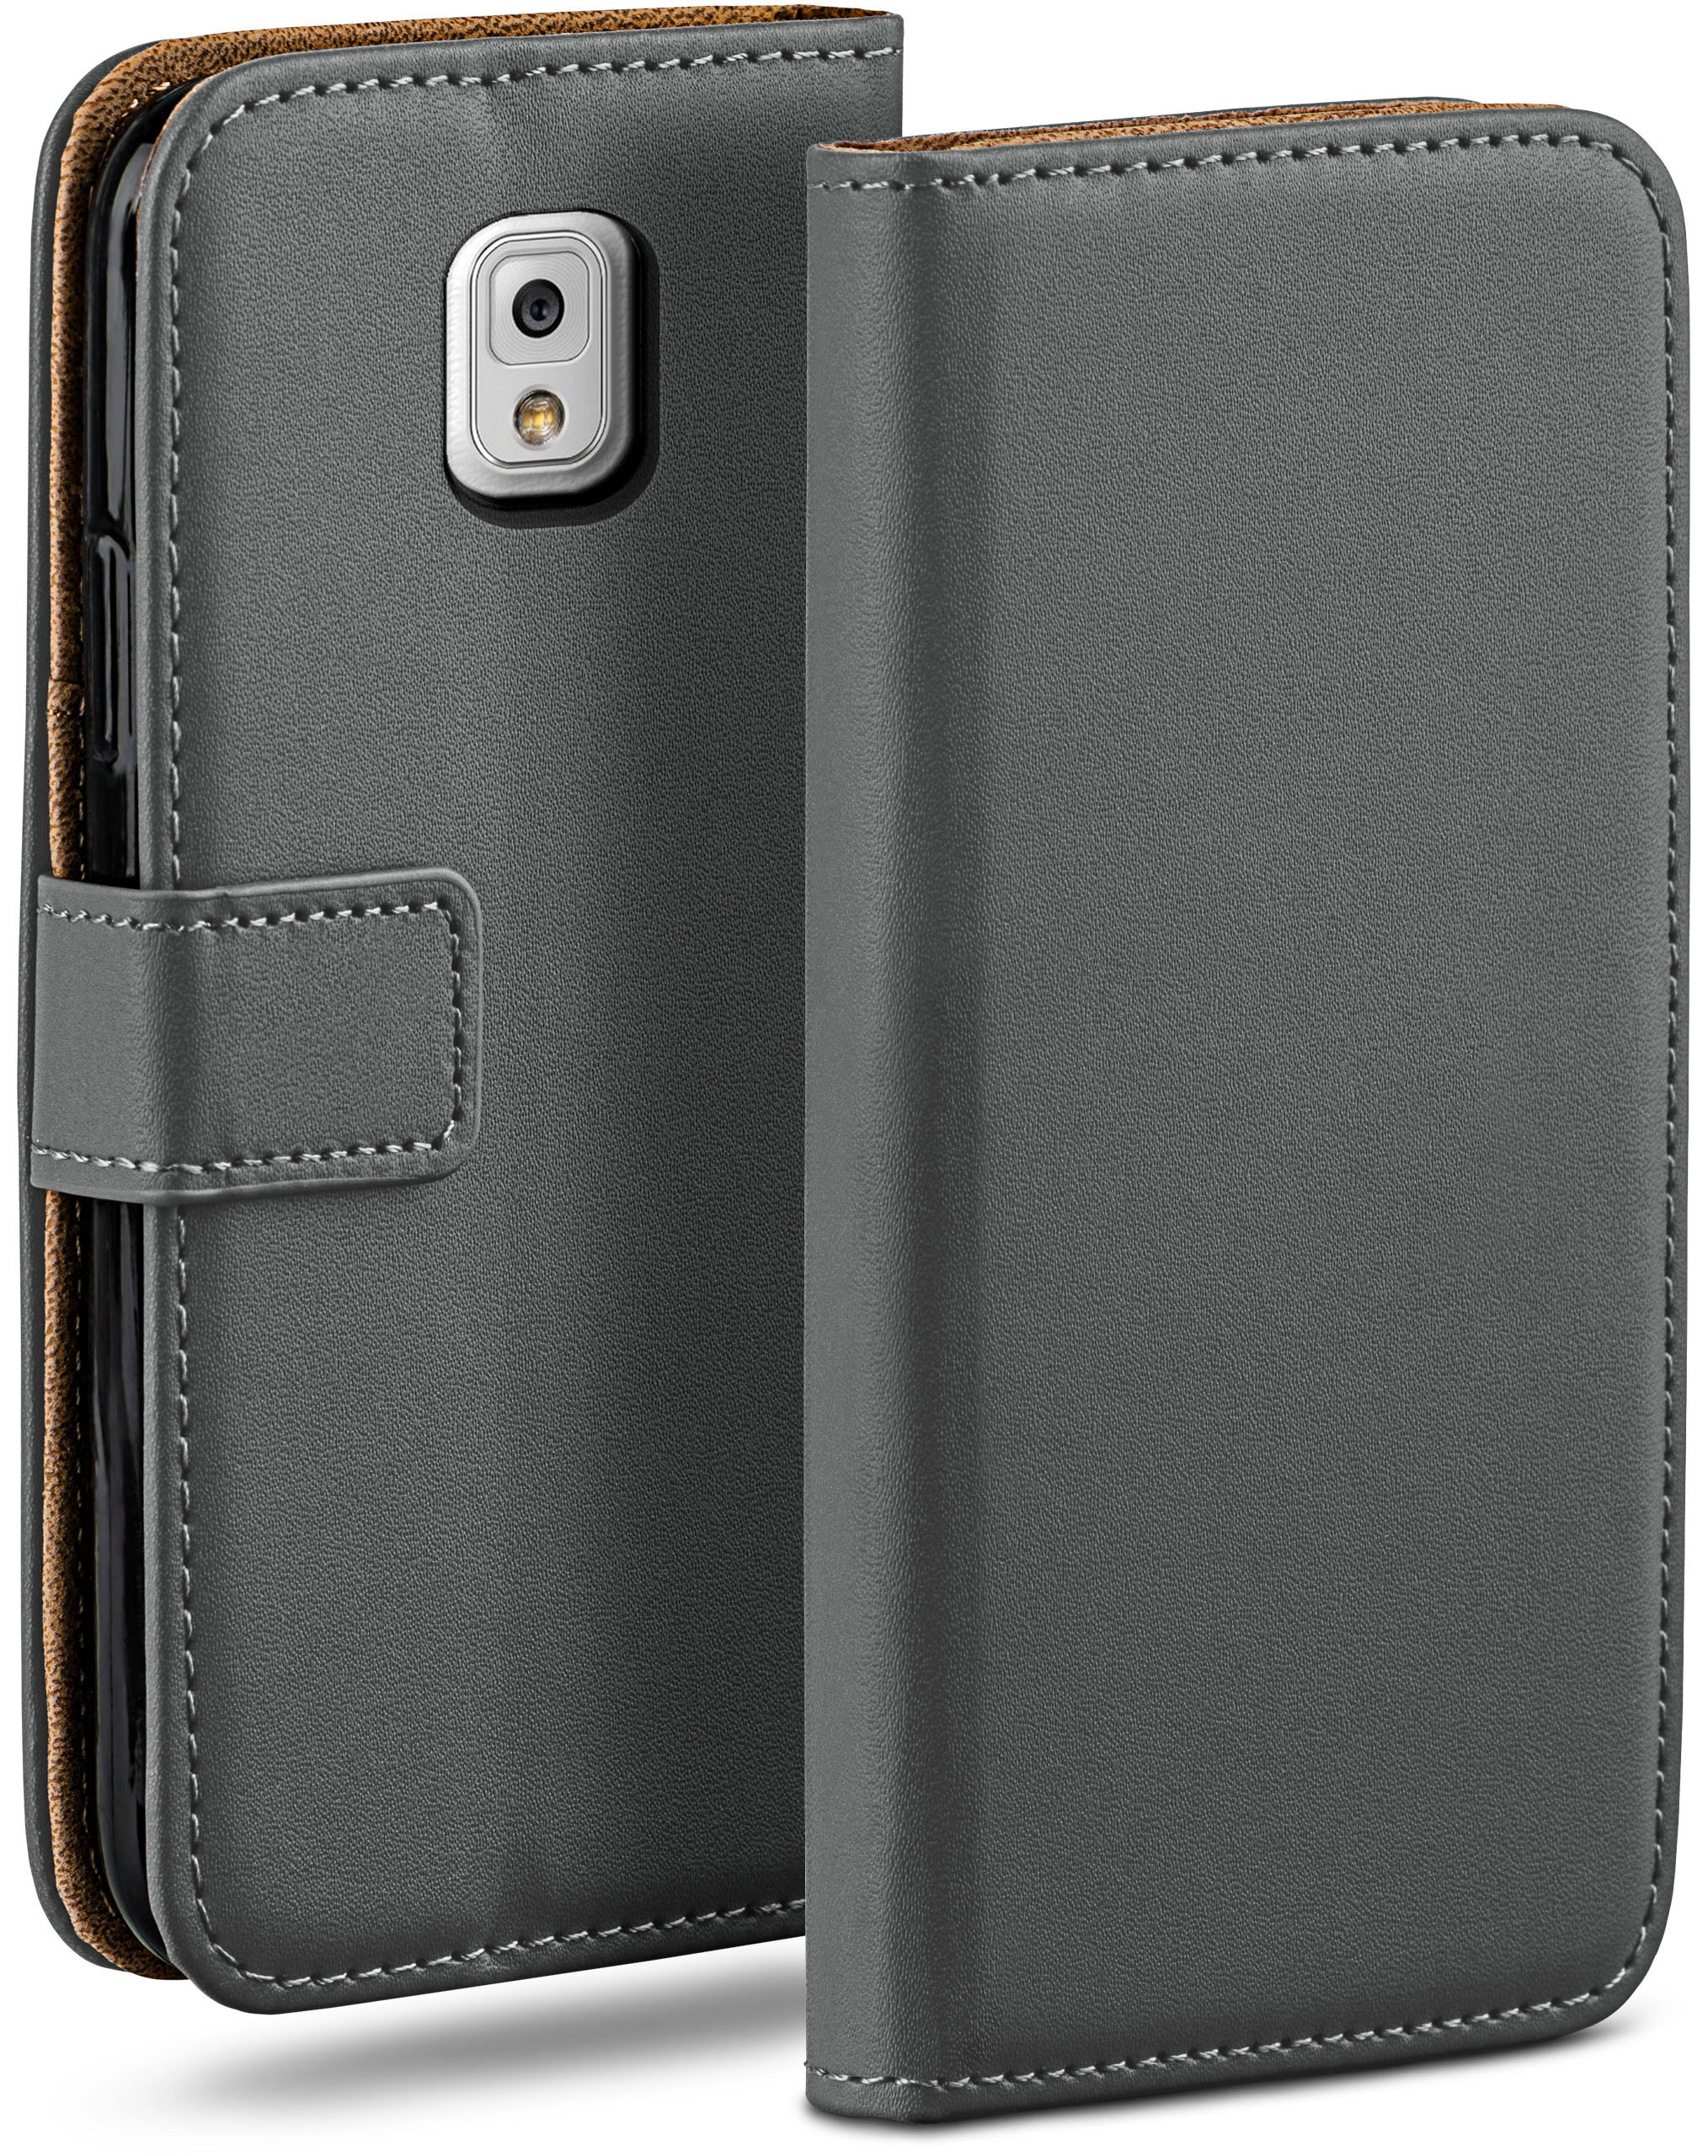 MOEX Book Case, Bookcover, Samsung, Anthracite-Gray Note 3, Galaxy